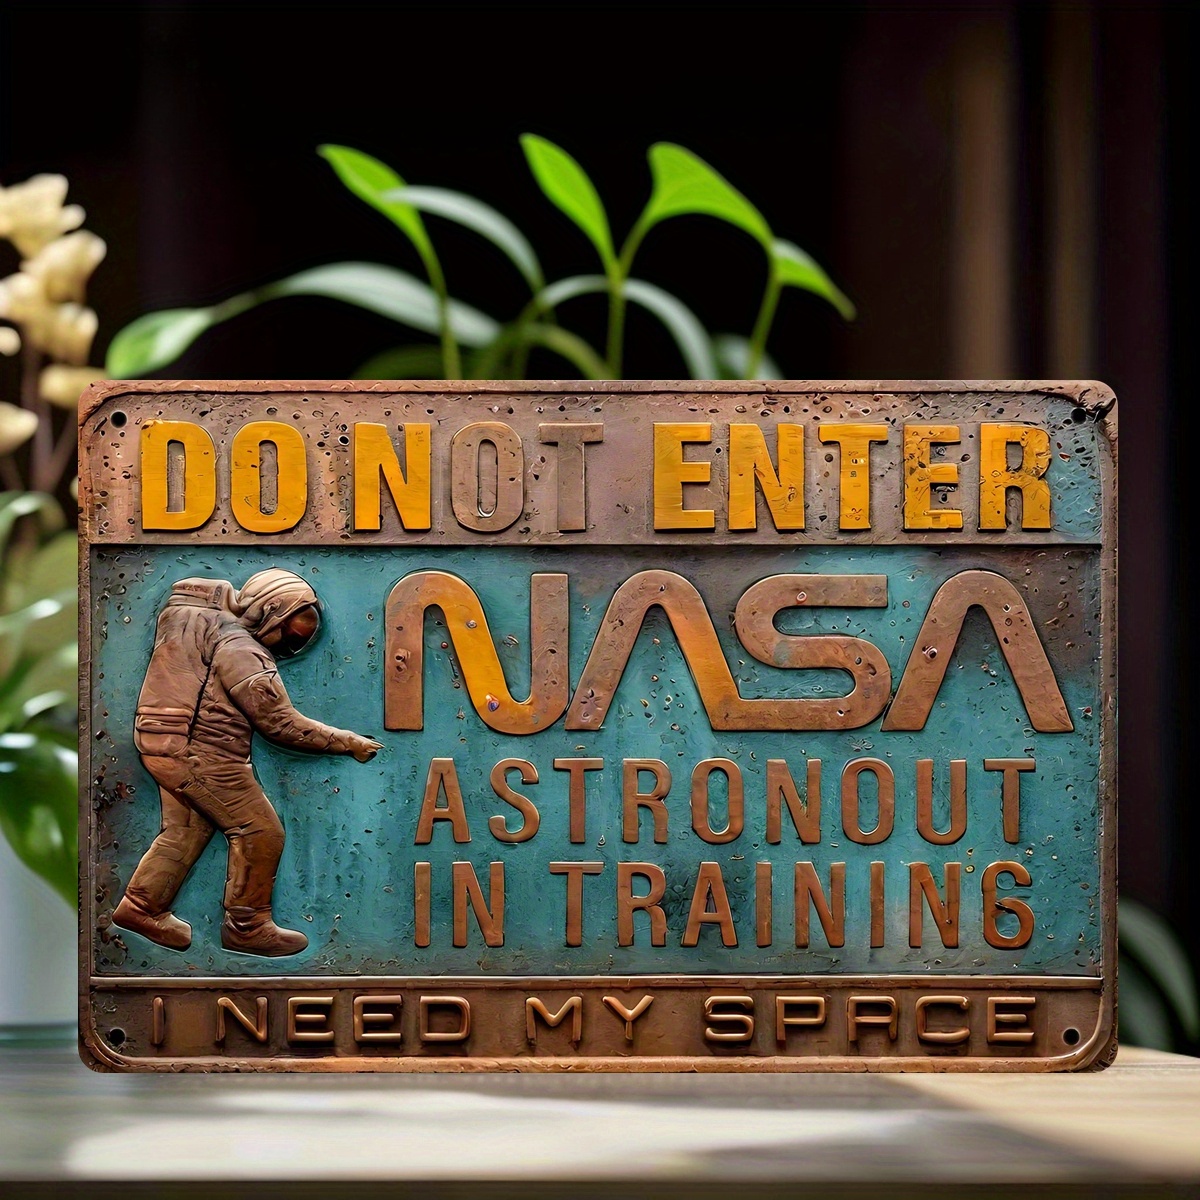 

Astronaut Training Zone" Metal Tin Sign - 8x12 Inches, Colorful 3d Visual Effects, Perfect For Home, Bedroom, Cafe, For Man Cave, Bar, Office, Club & Party Decor